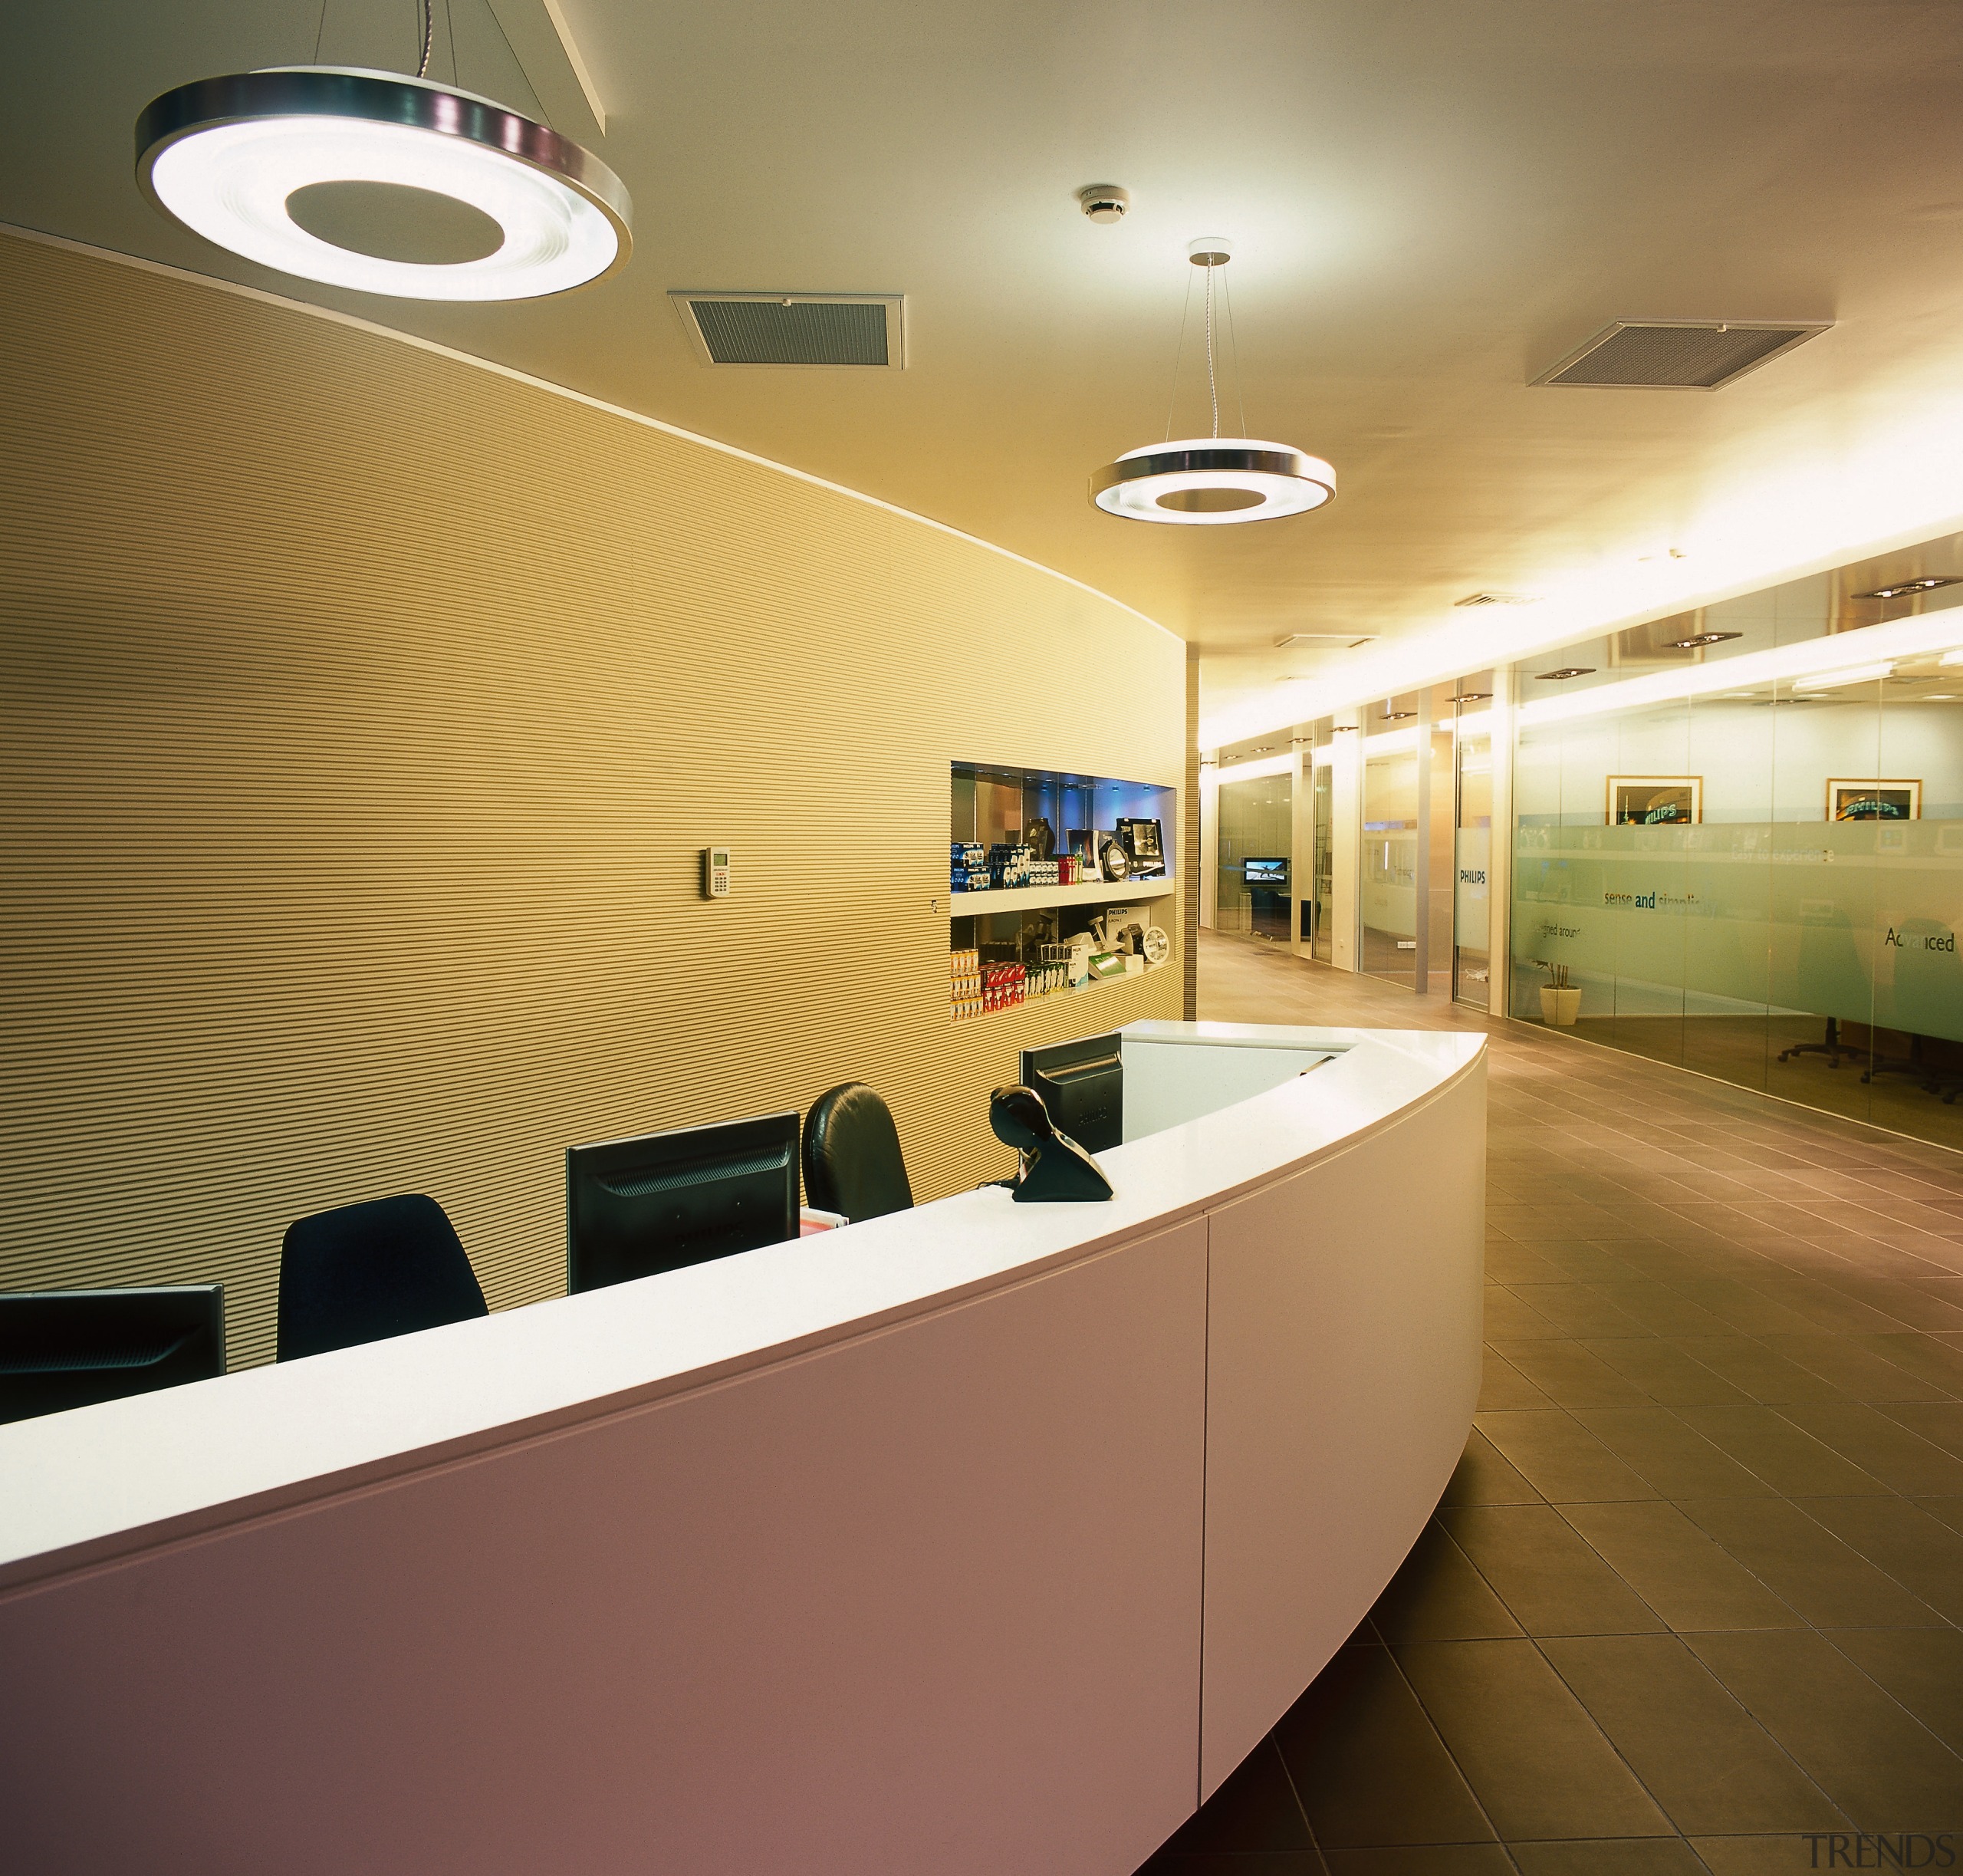 A view of the lighting design. - A ceiling, interior design, lobby, office, product design, brown